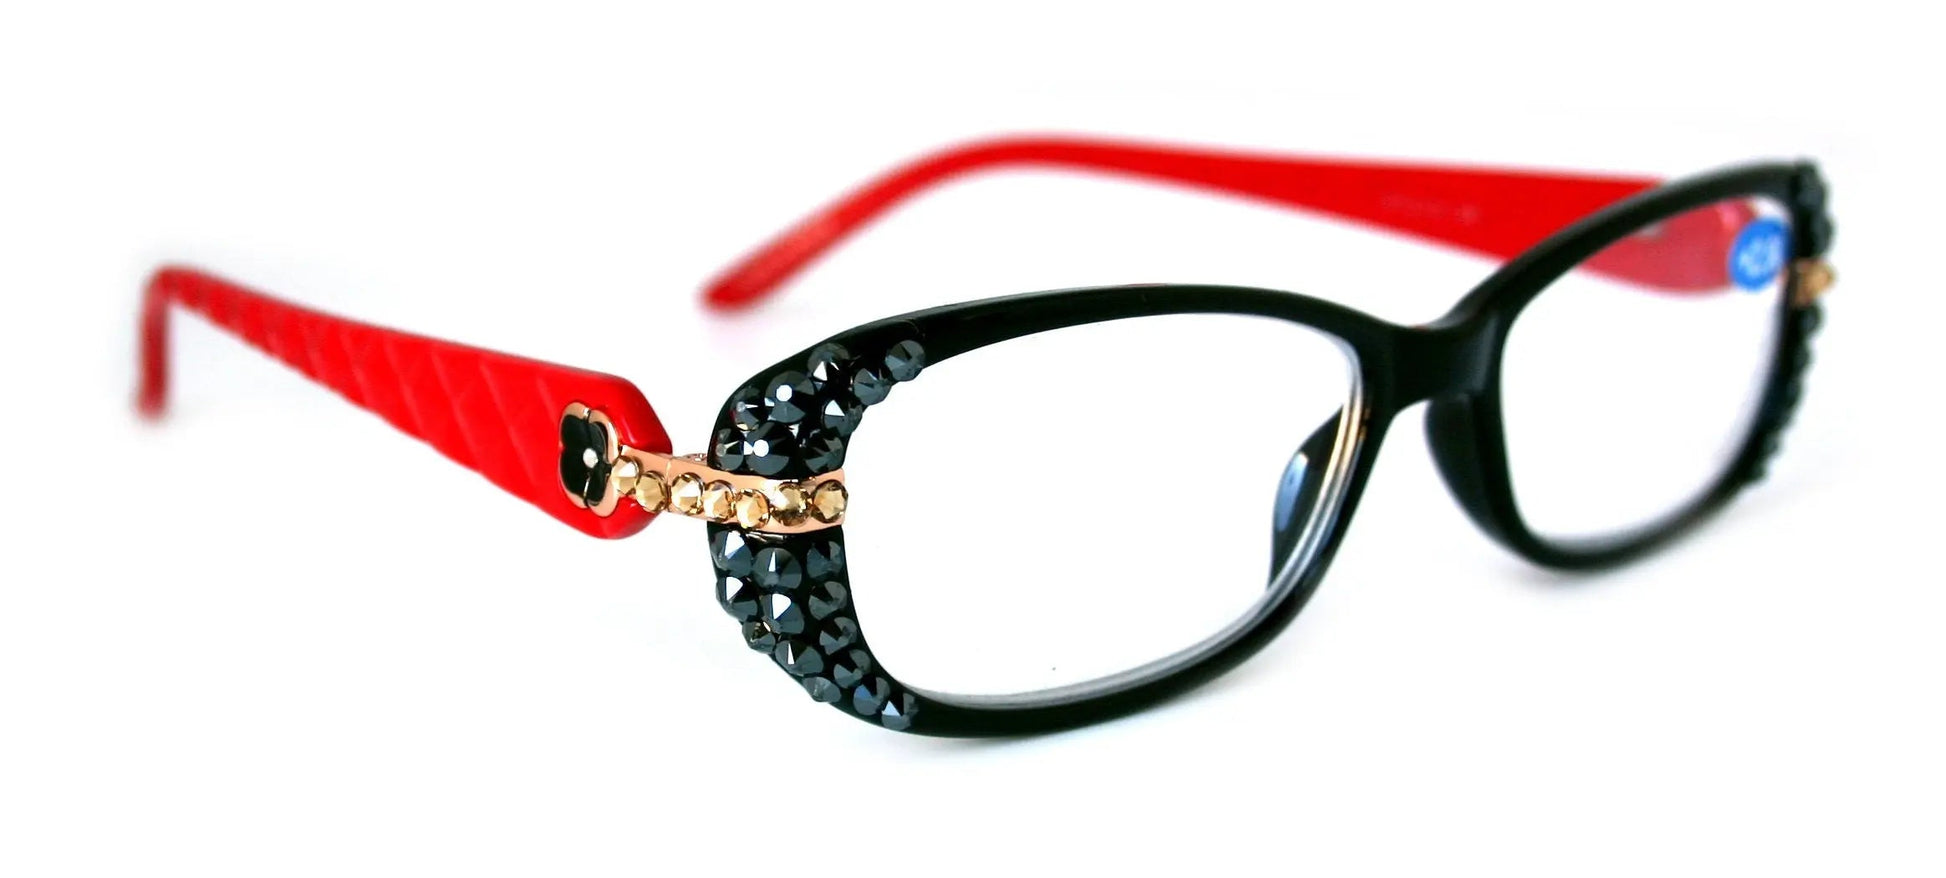 Glamour Quilted, (Bling) Reading Glasses For Women W (Hematite, L. Colorado) Genuine European Crystals(Red, Black)  NY fifth avenue 